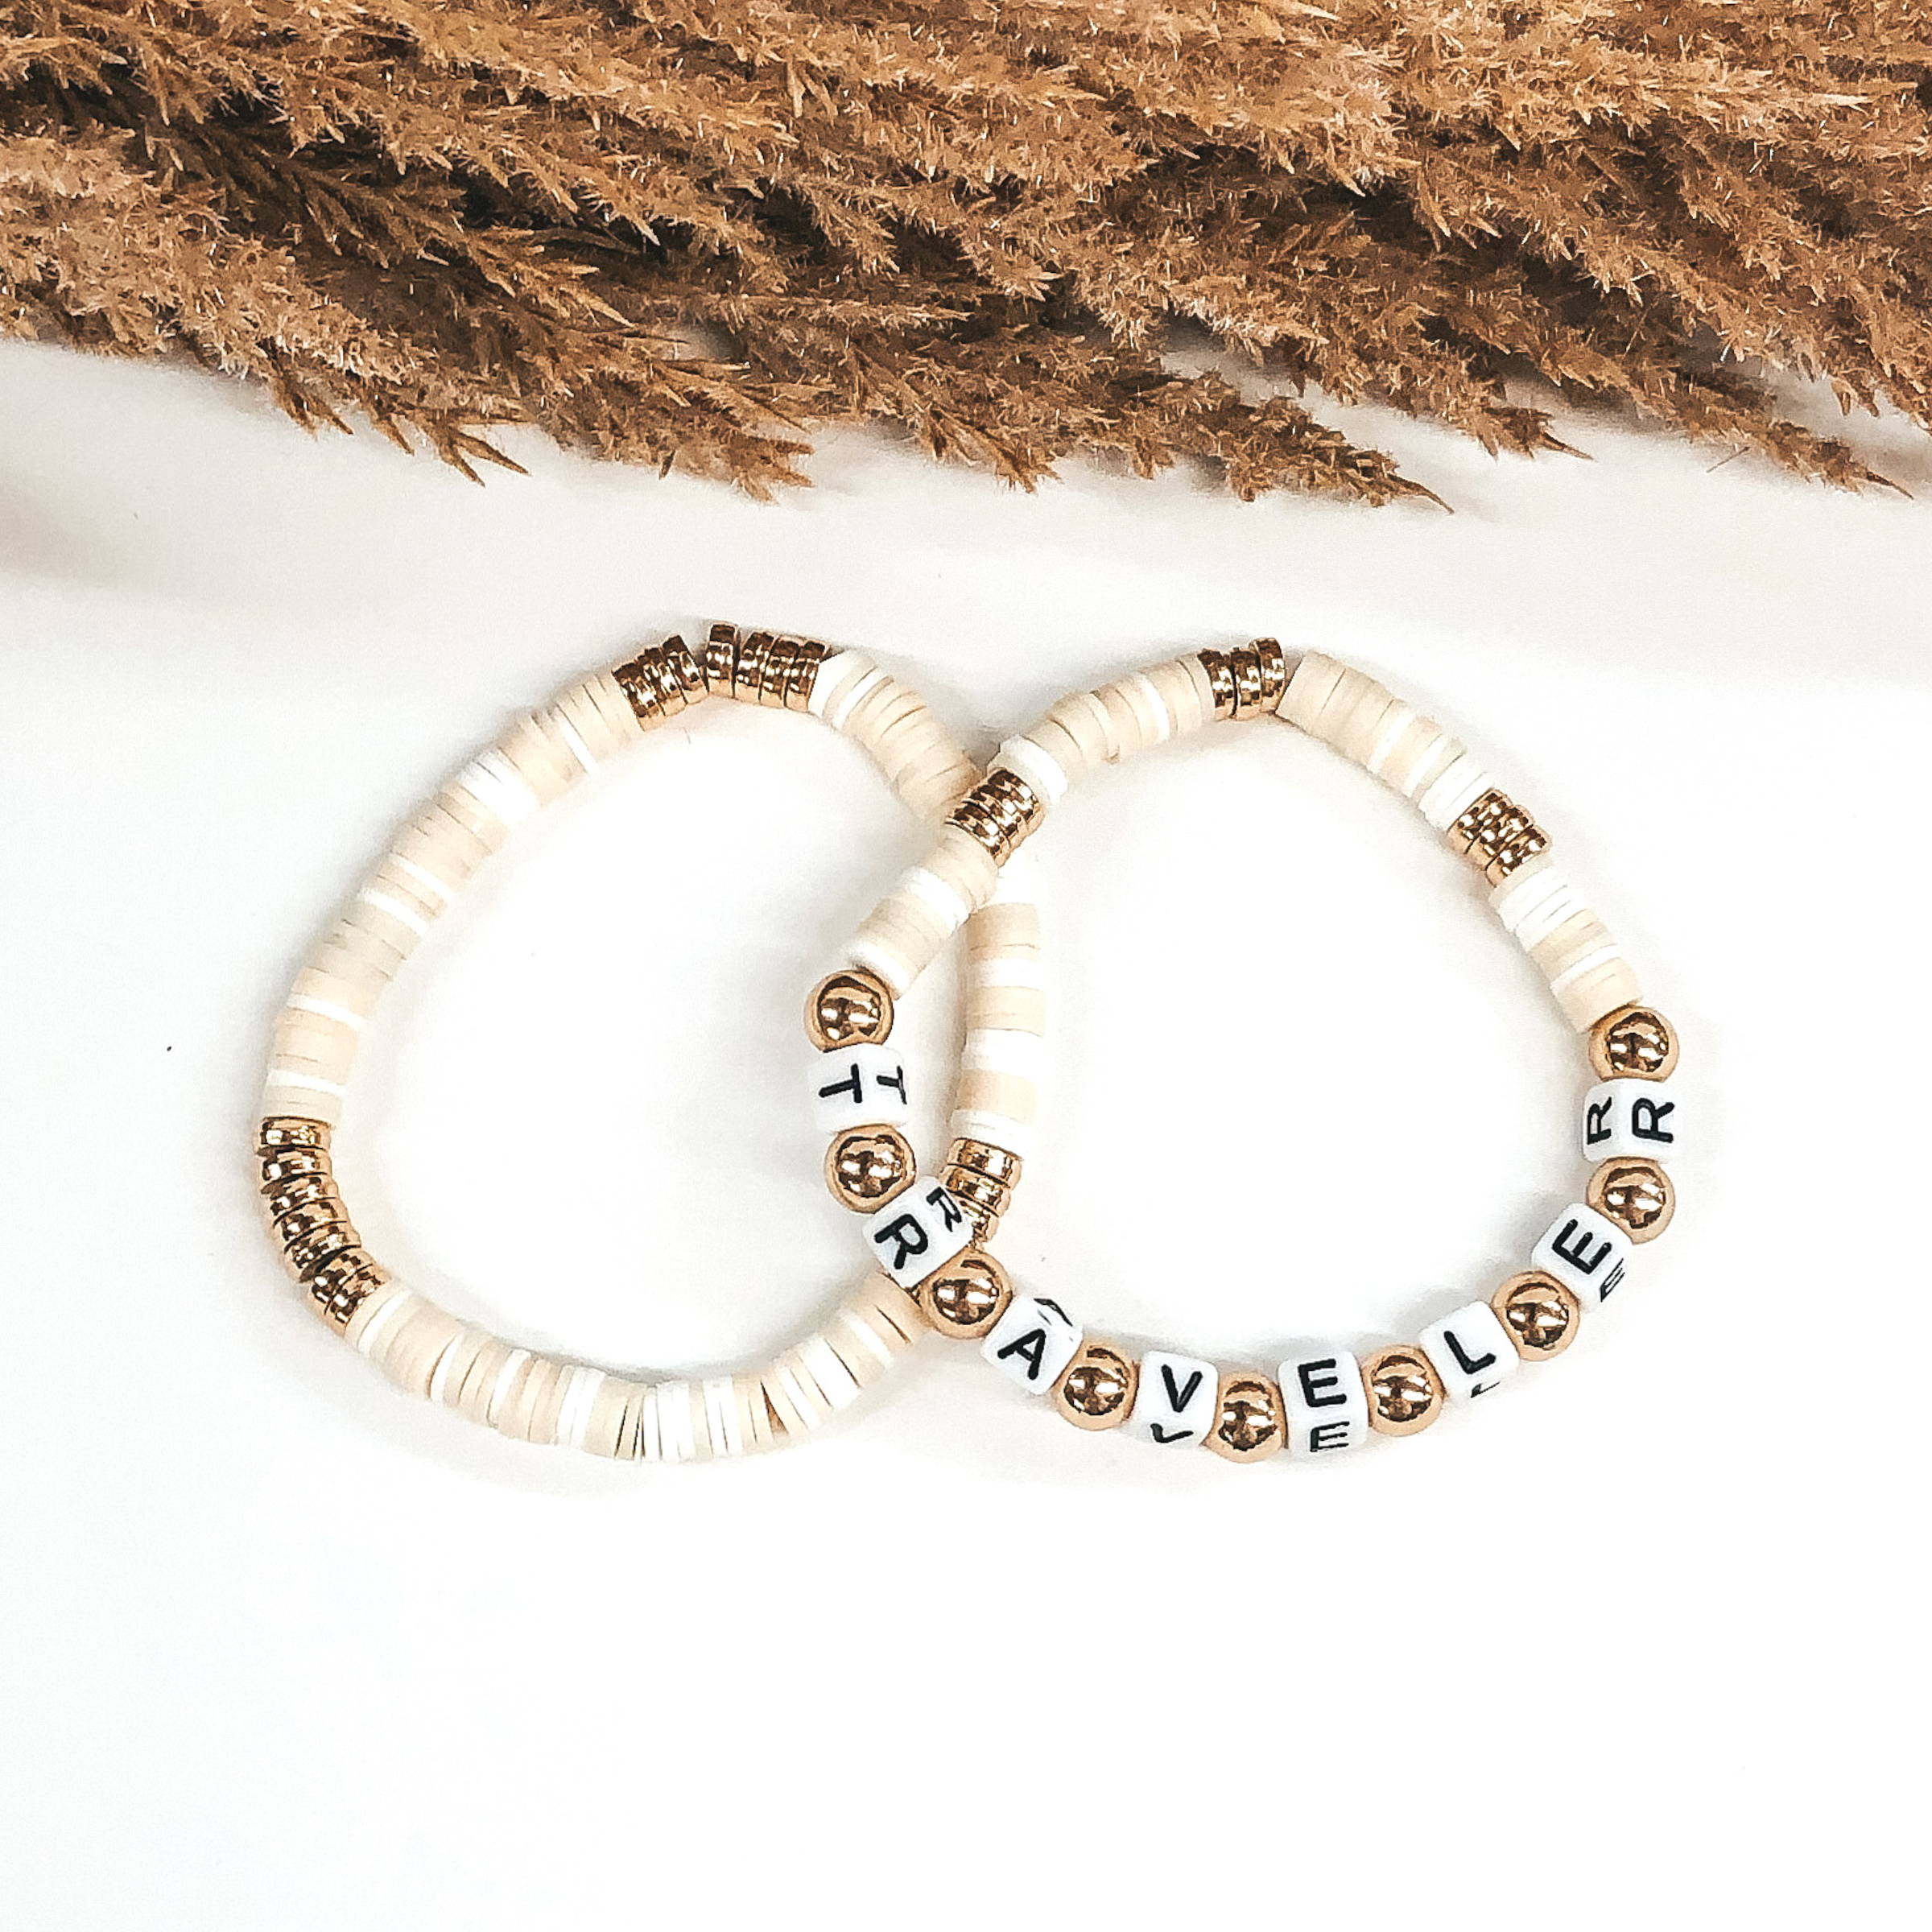 Two bracelets that has a mix of ivory colors and white disk beads. On one bracelet, you have three sections of gold disc beads. On the other bracelet you have three smaller section of gold disc beads and then letter beads that spell out "TRAVELER" with gold spacers in between. These bracelets are pictured on a white background.